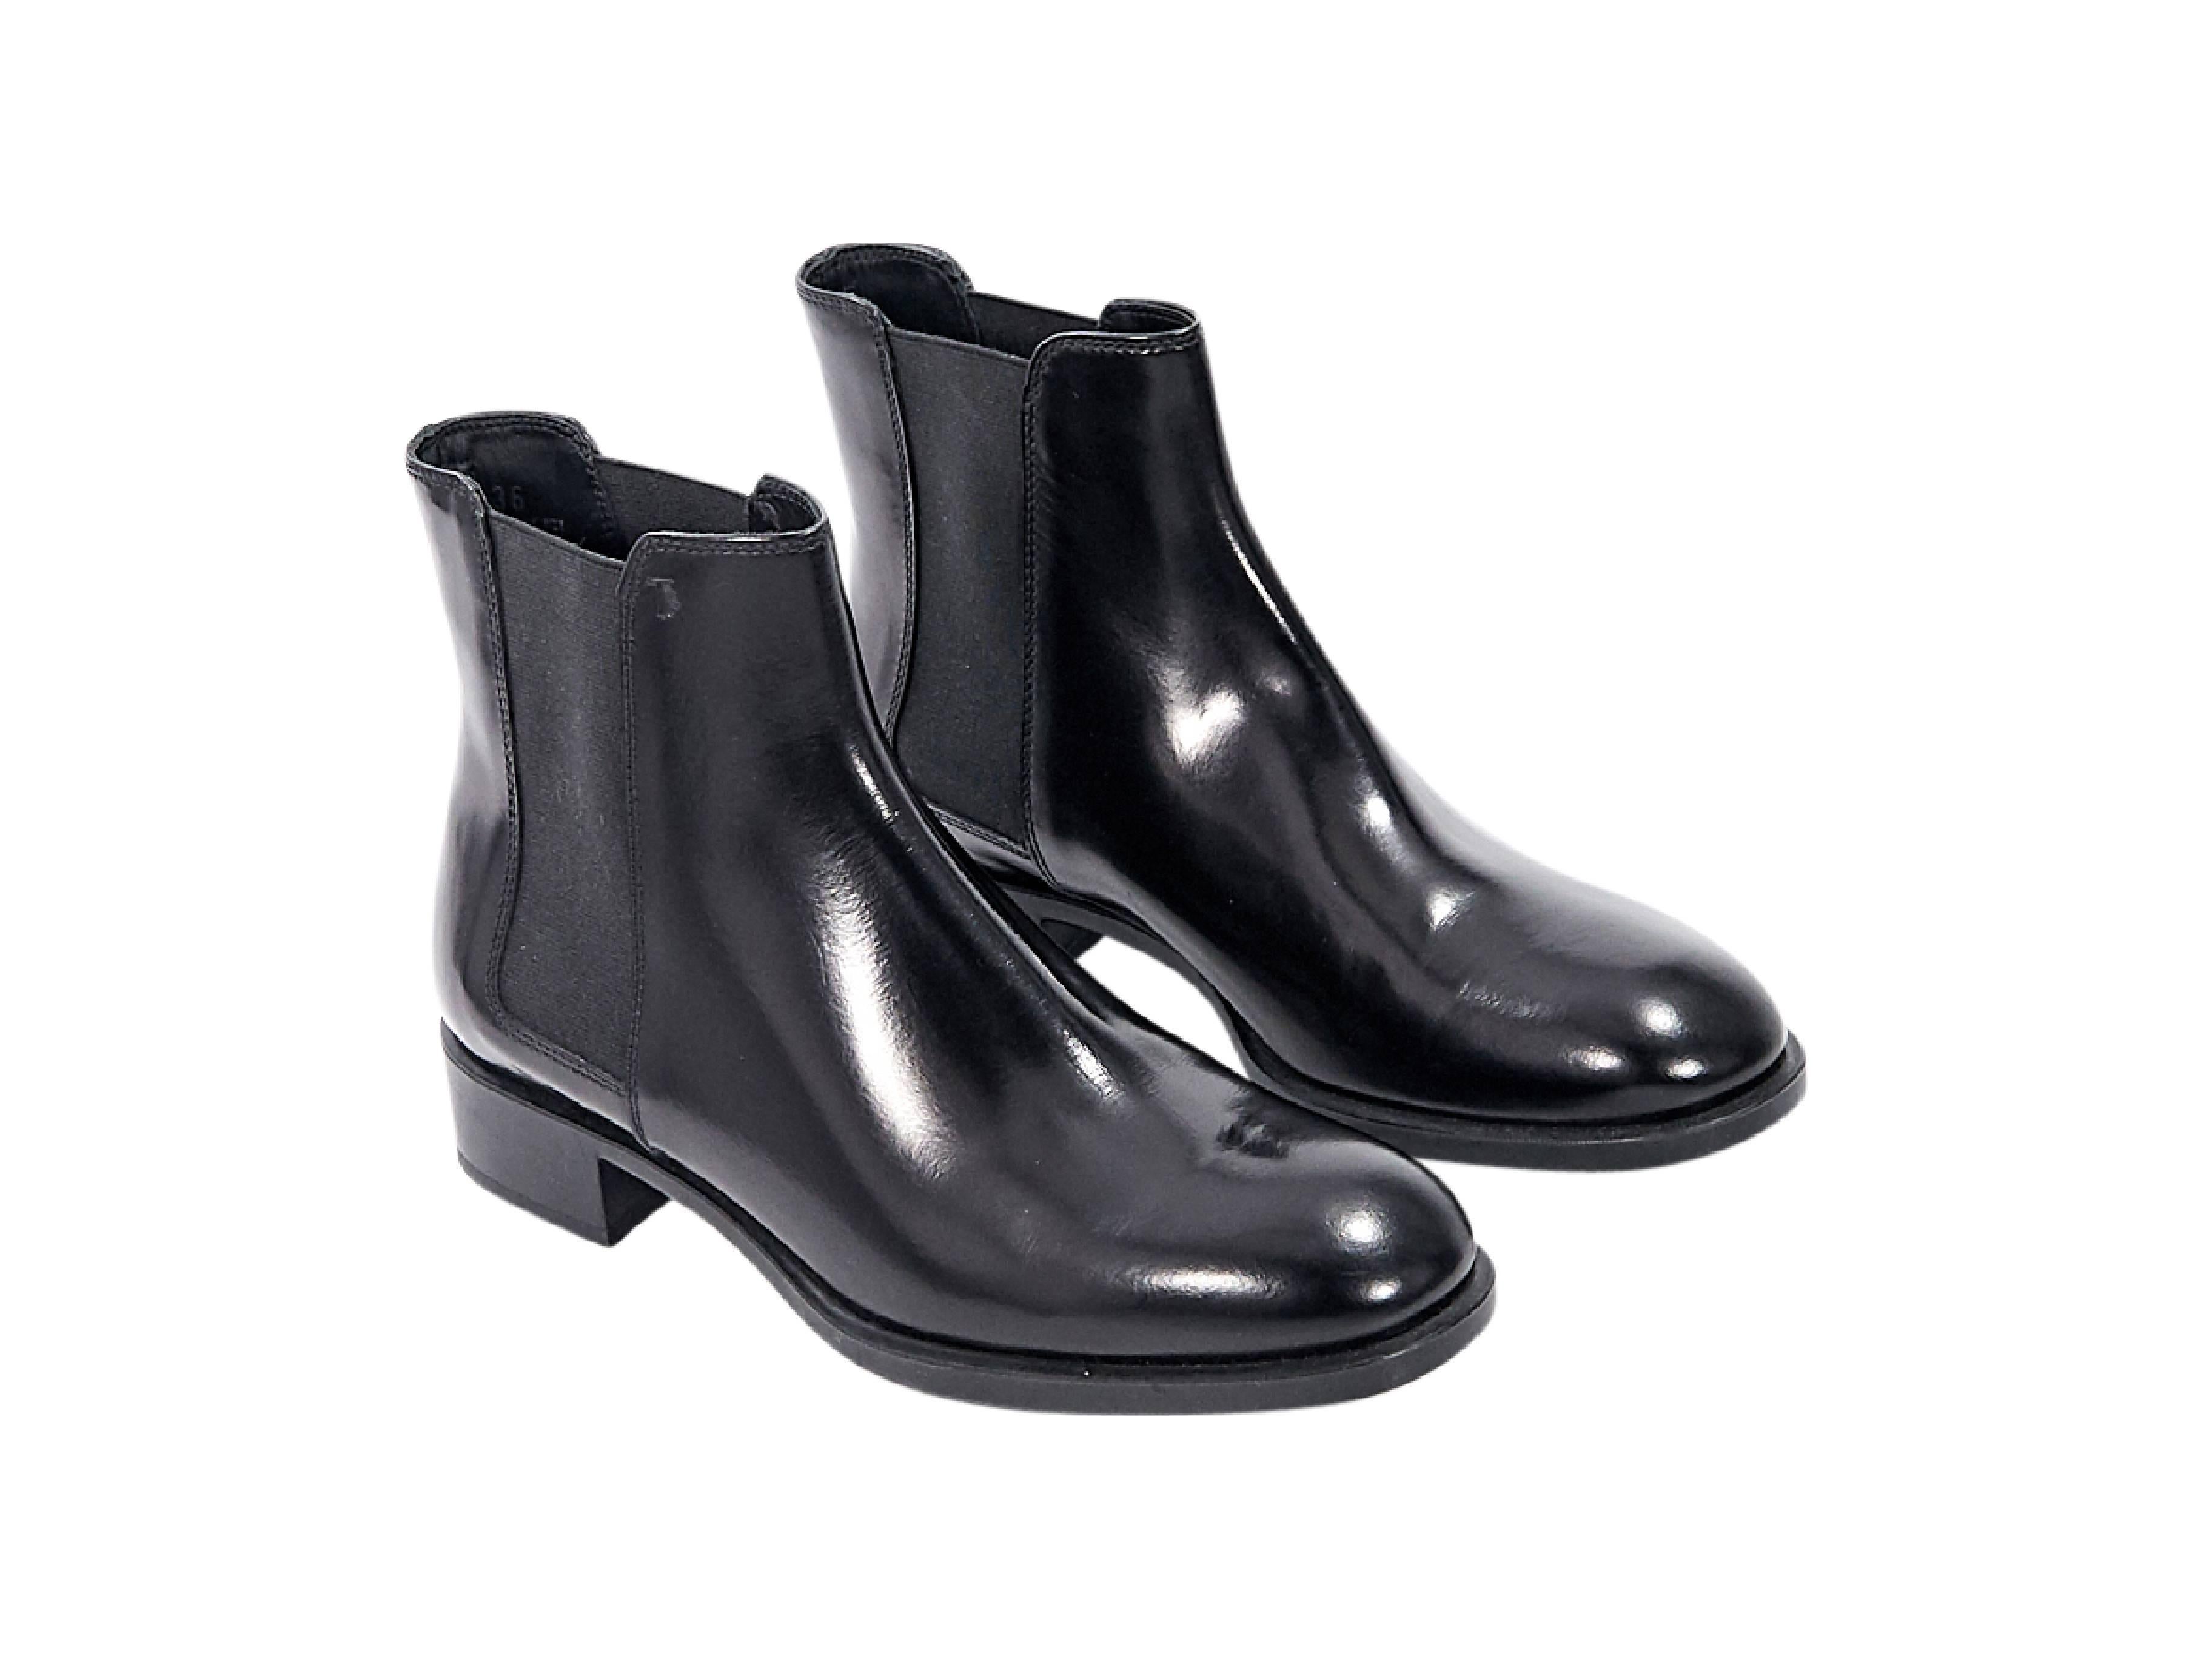 Product details:  Black leather Chelsea boots by Tod's.  Side elastic panels for an easy fit.  Round toe.  Slip-on style. Size 6
Condition: Pre-owned. Very good.

Est. Retail $ 598.00
